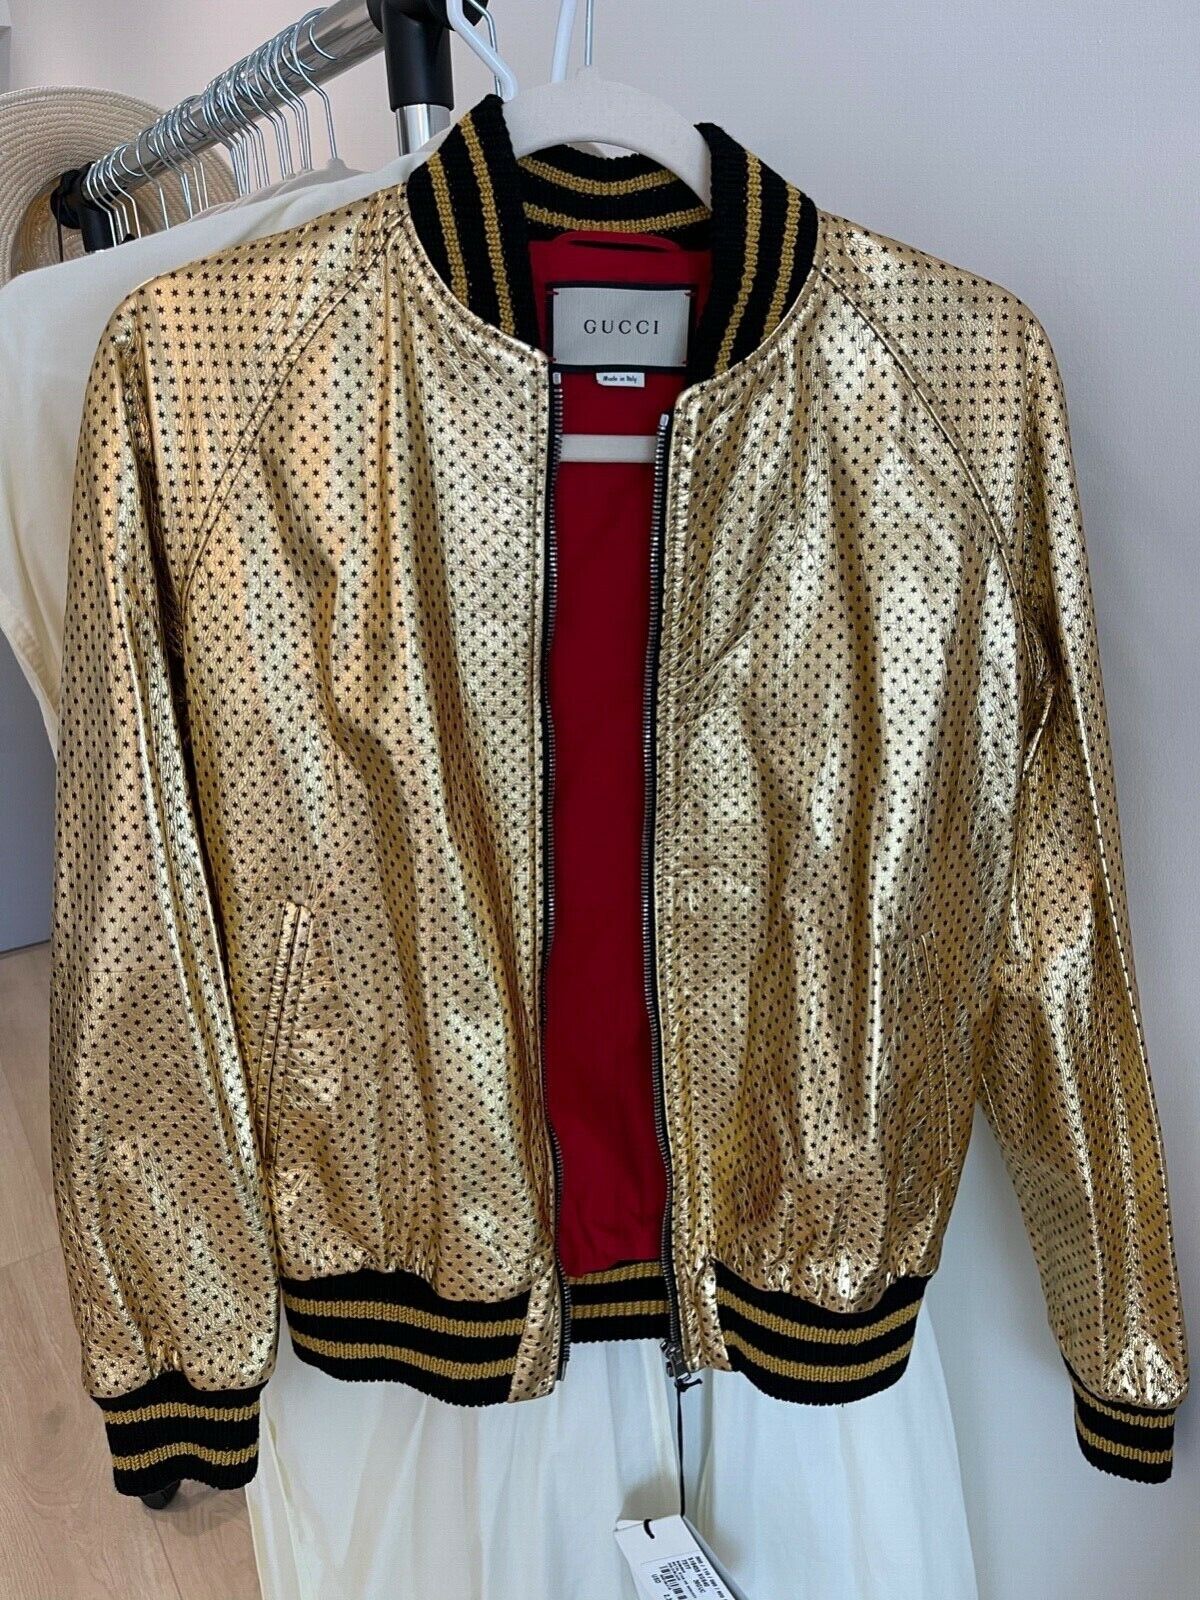 WOMEN’S GOLD GUCCI JACKET size 36 brand new